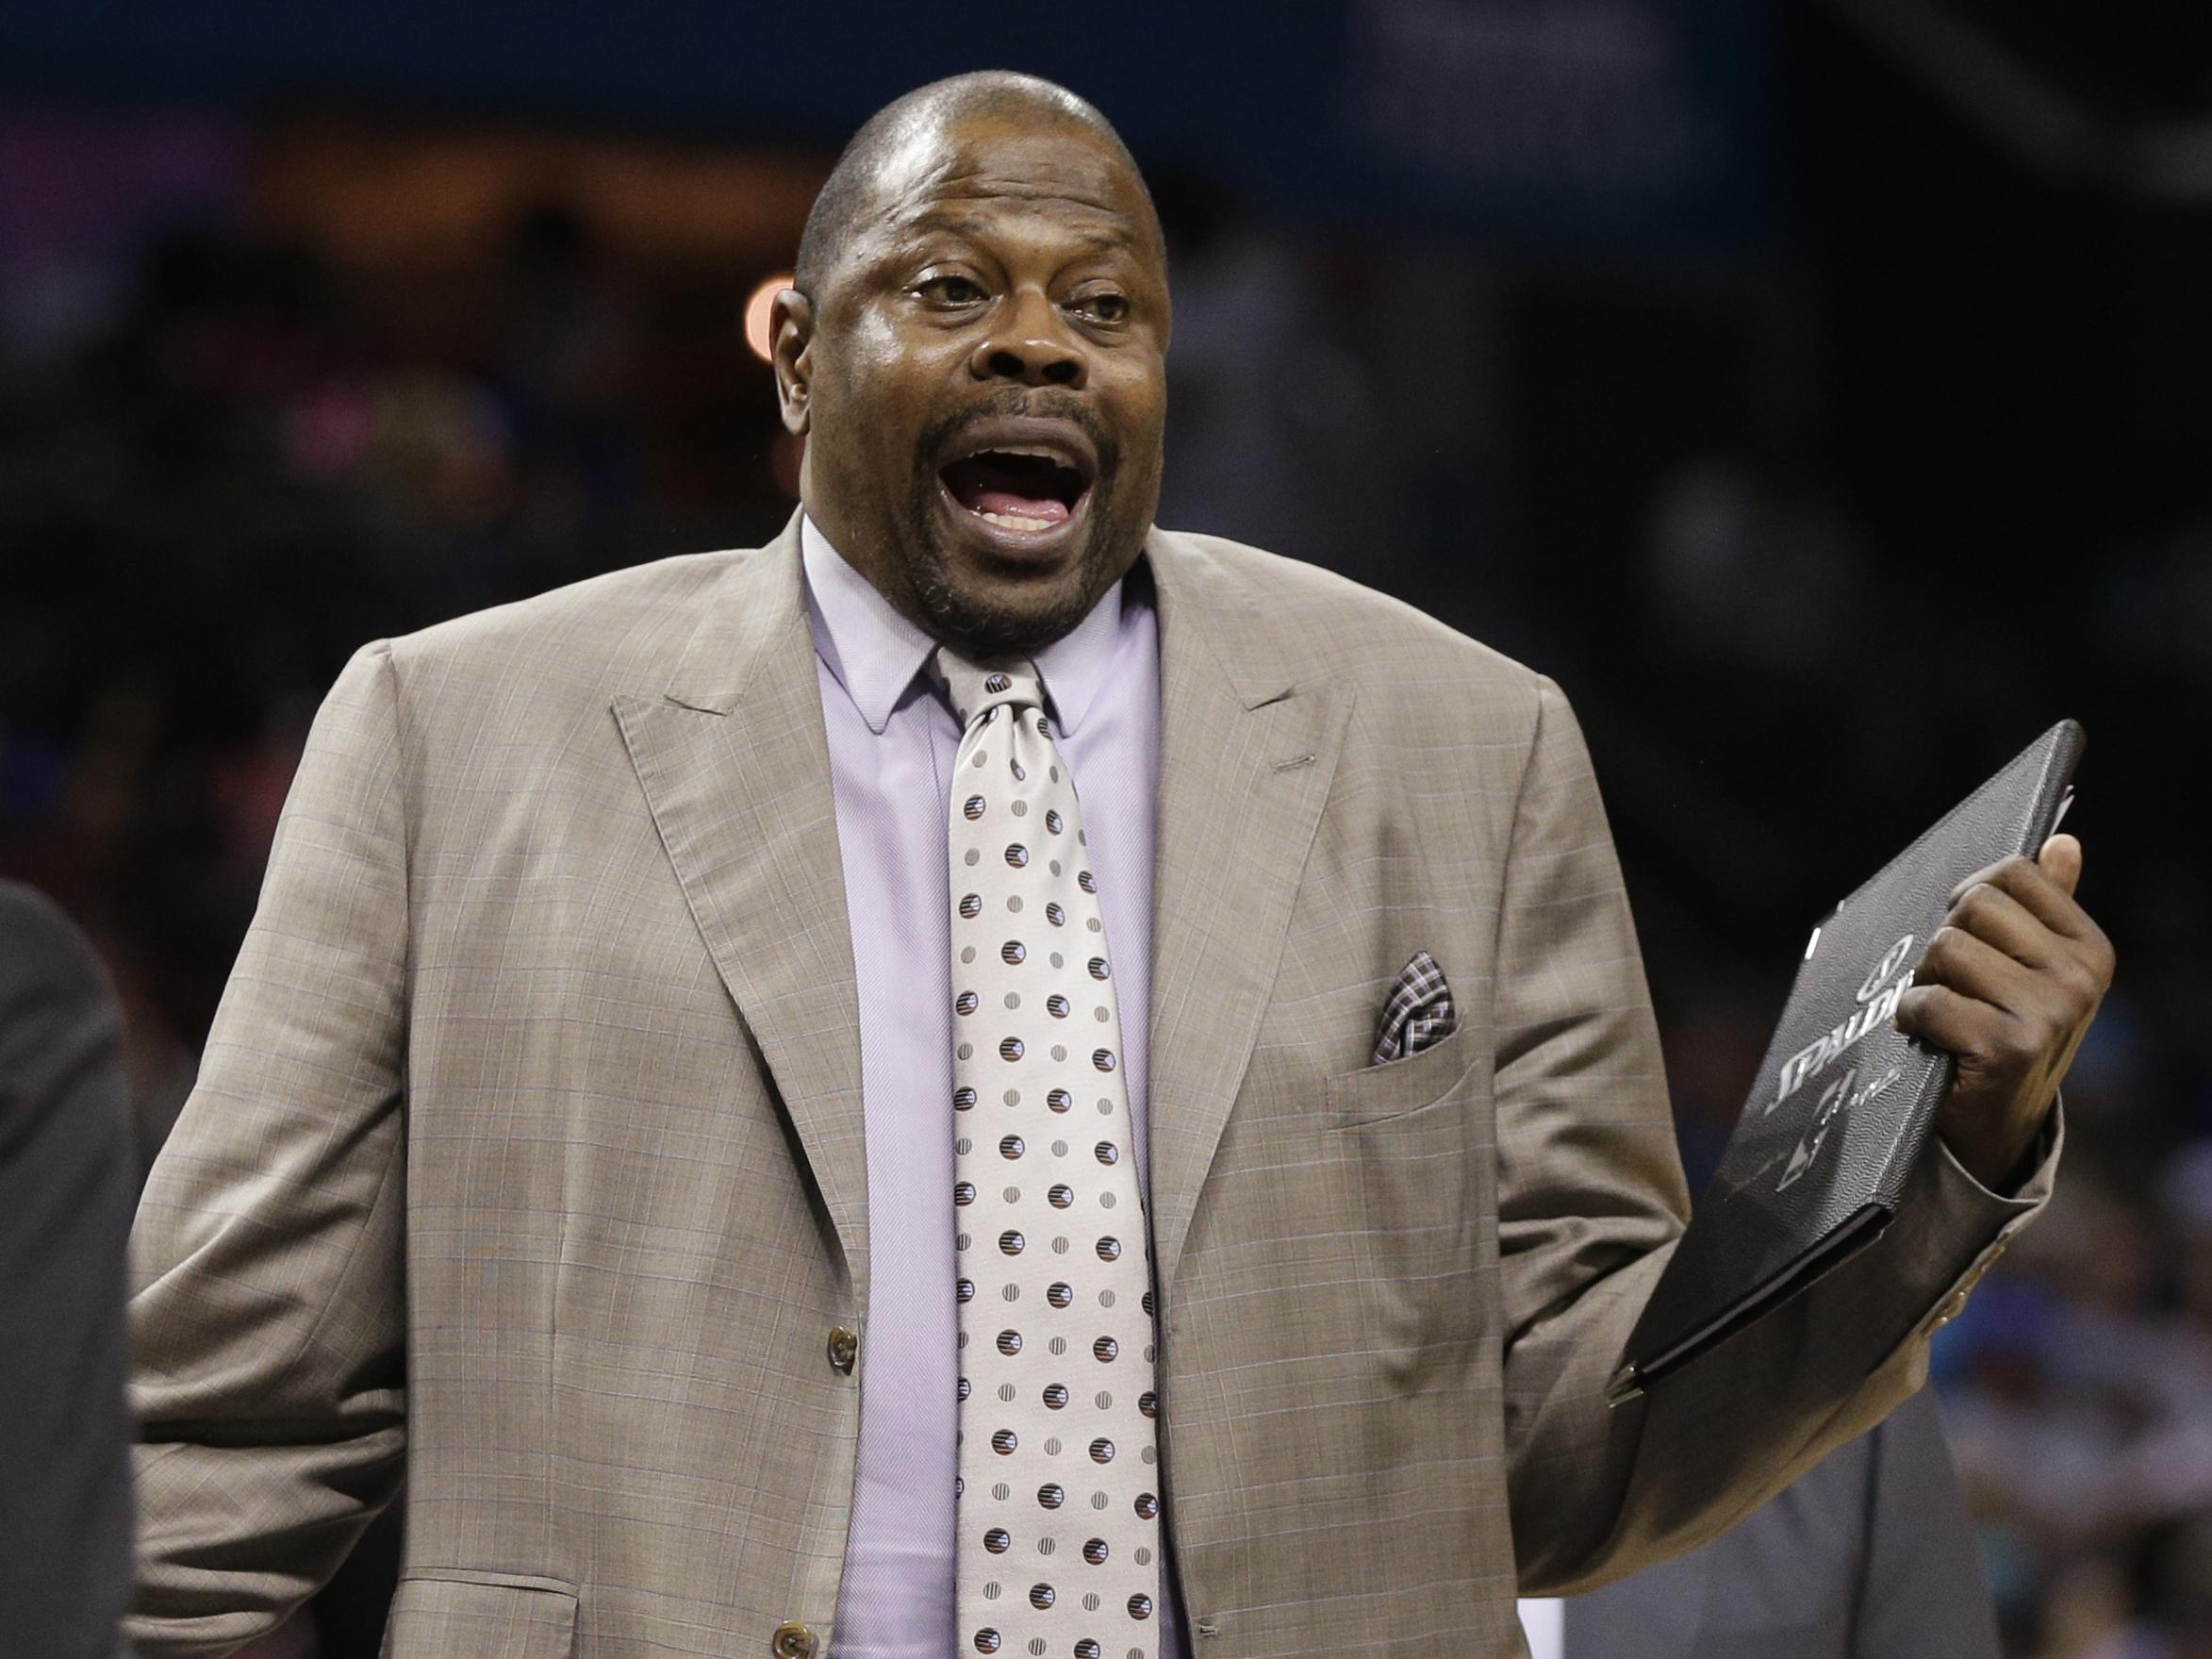 Georgetown hires Patrick Ewing as men’s basketball coach | The ...